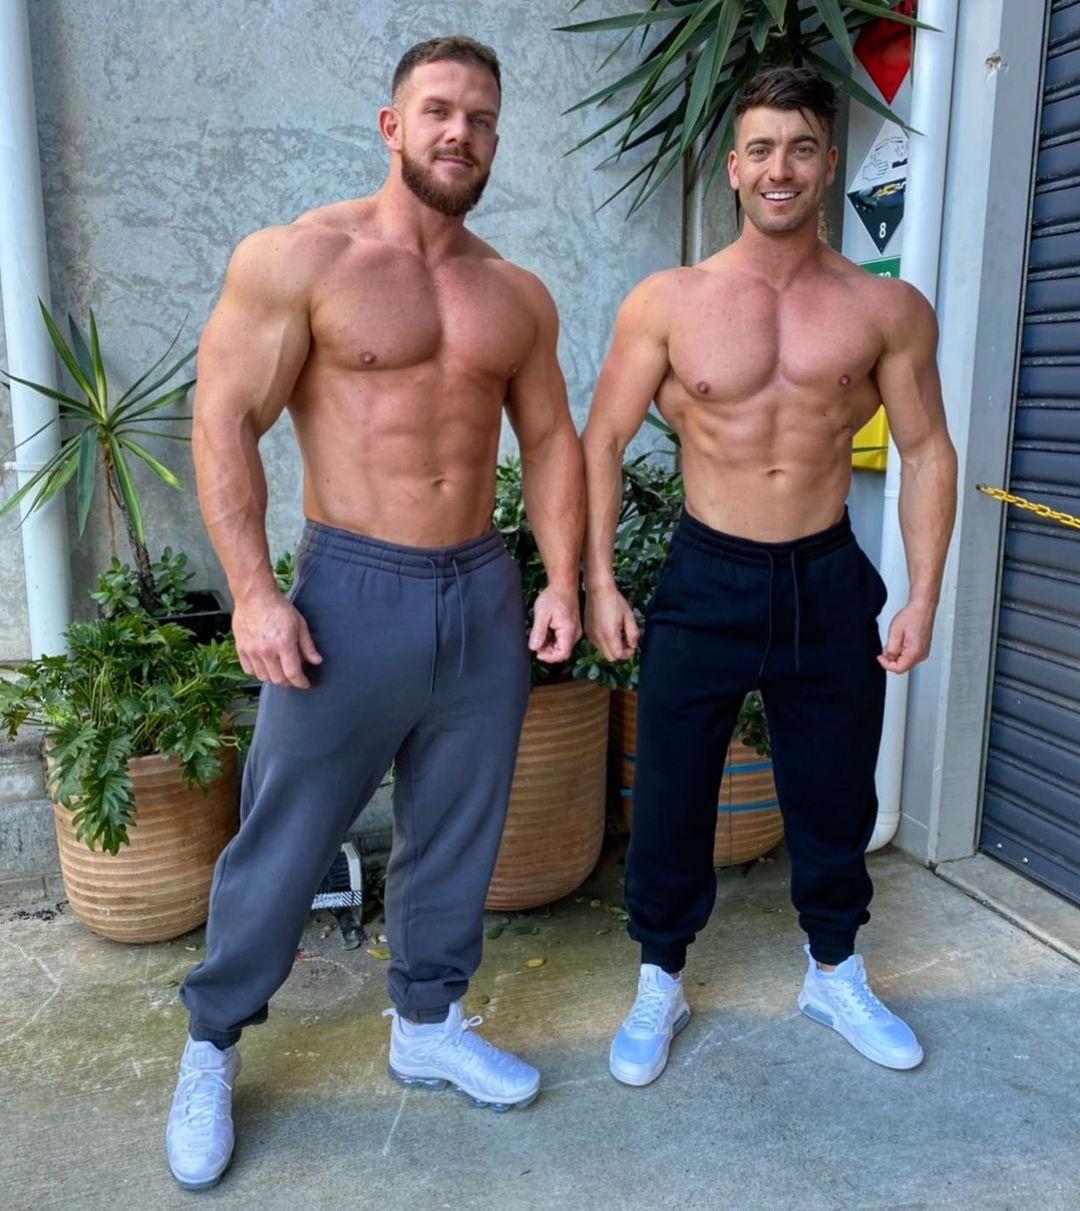 two-sexy-bodybuilders-matt-oreilly-beefy-shirtless-muscle-hunks